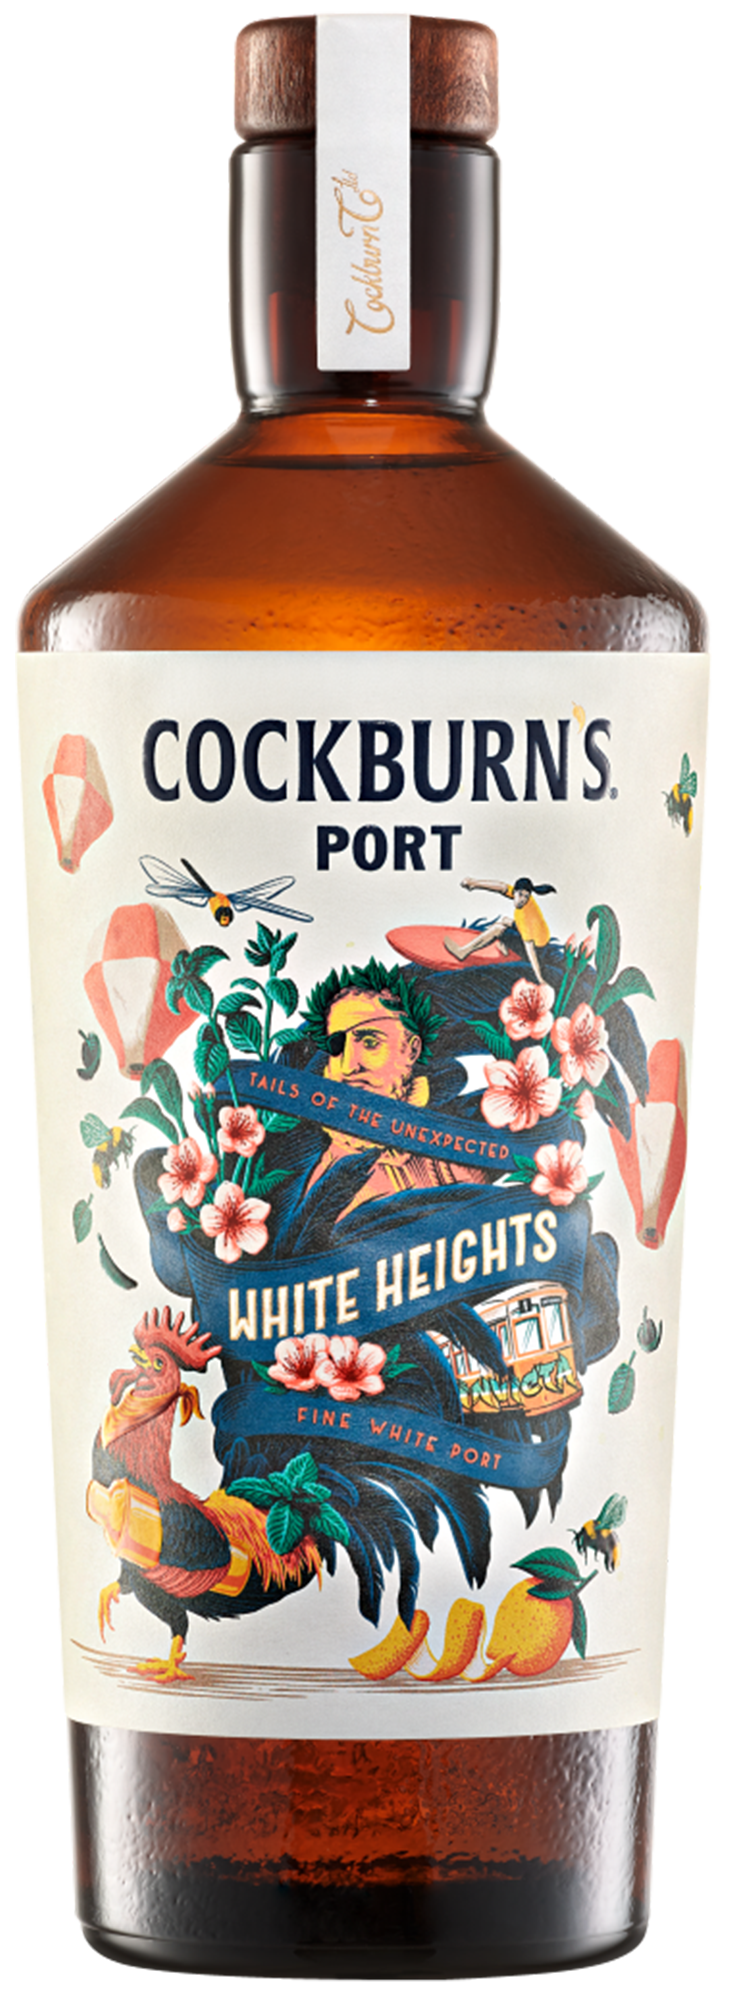 Product Image for COCKBURN'S 'TAILS OF THE UNEXPECTED' WHITE HEIGHTS